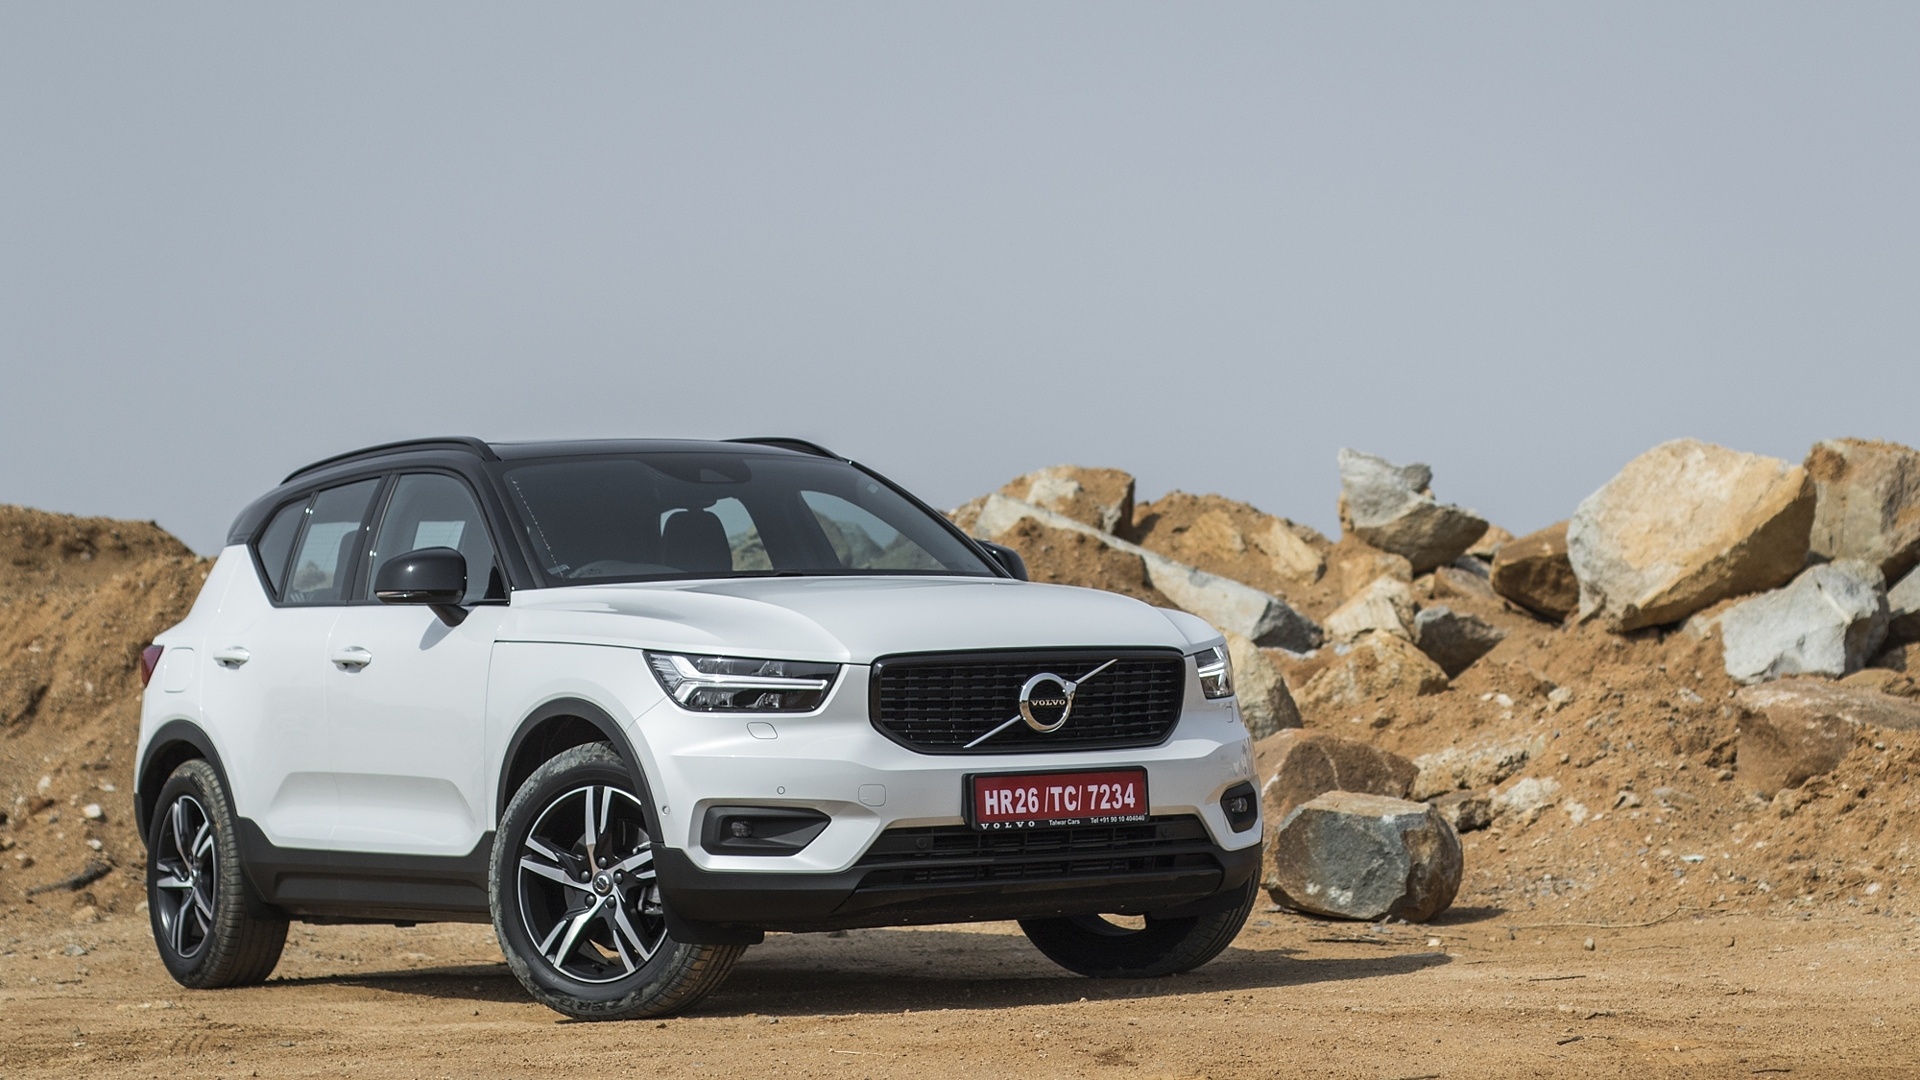 Volvo XC40 images, Interior & exterior photo gallery, Carwale, Auto expert, 1920x1080 Full HD Desktop